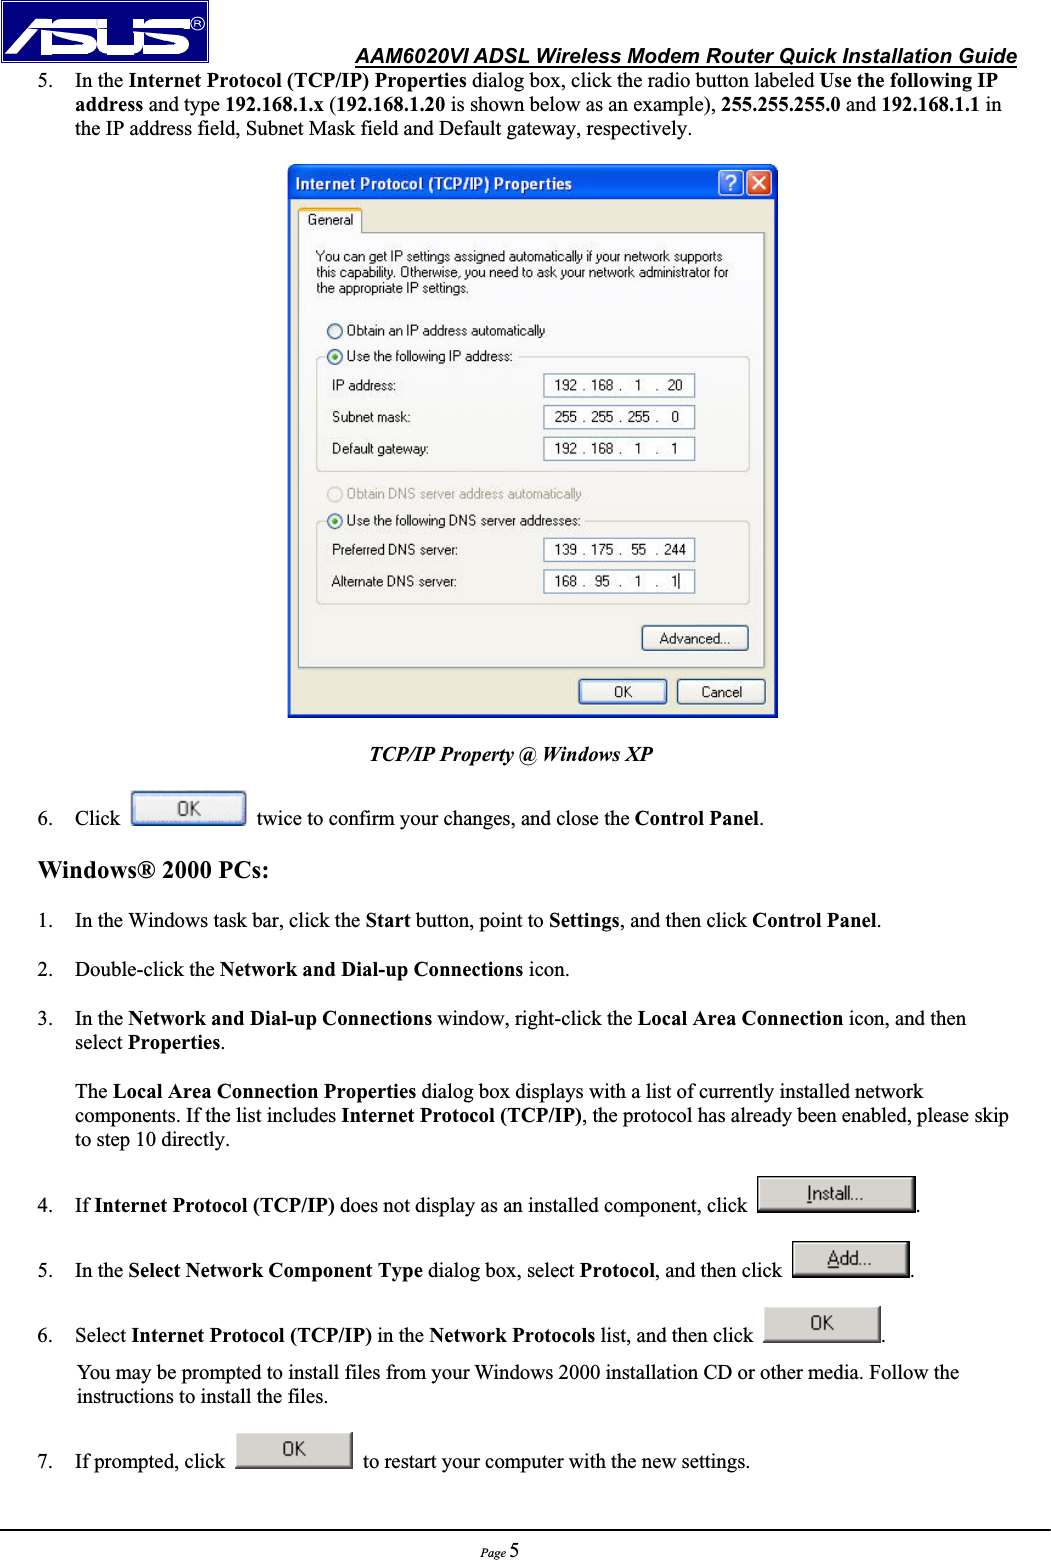               AAM6020VI ADSL Wireless Modem Router Quick Installation GuidePage 55. In the Internet Protocol (TCP/IP) Properties dialog box, click the radio button labeled Use the following IP address and type 192.168.1.x (192.168.1.20 is shown below as an example), 255.255.255.0 and 192.168.1.1 in the IP address field, Subnet Mask field and Default gateway, respectively. TCP/IP Property @ Windows XP 6. Click    twice to confirm your changes, and close the Control Panel.Windows® 2000 PCs: 1. In the Windows task bar, click the Start button, point to Settings, and then click Control Panel.2. Double-click the Network and Dial-up Connections icon. 3. In the Network and Dial-up Connections window, right-click the Local Area Connection icon, and then           select Properties.The Local Area Connection Properties dialog box displays with a list of currently installed network components. If the list includes Internet Protocol (TCP/IP), the protocol has already been enabled, please skip to step 10 directly. 4. If Internet Protocol (TCP/IP) does not display as an installed component, click  .5. In the Select Network Component Type dialog box, select Protocol, and then click  .6. Select Internet Protocol (TCP/IP) in the Network Protocols list, and then click  .You may be prompted to install files from your Windows 2000 installation CD or other media. Follow the instructions to install the files. 7. If prompted, click    to restart your computer with the new settings. 